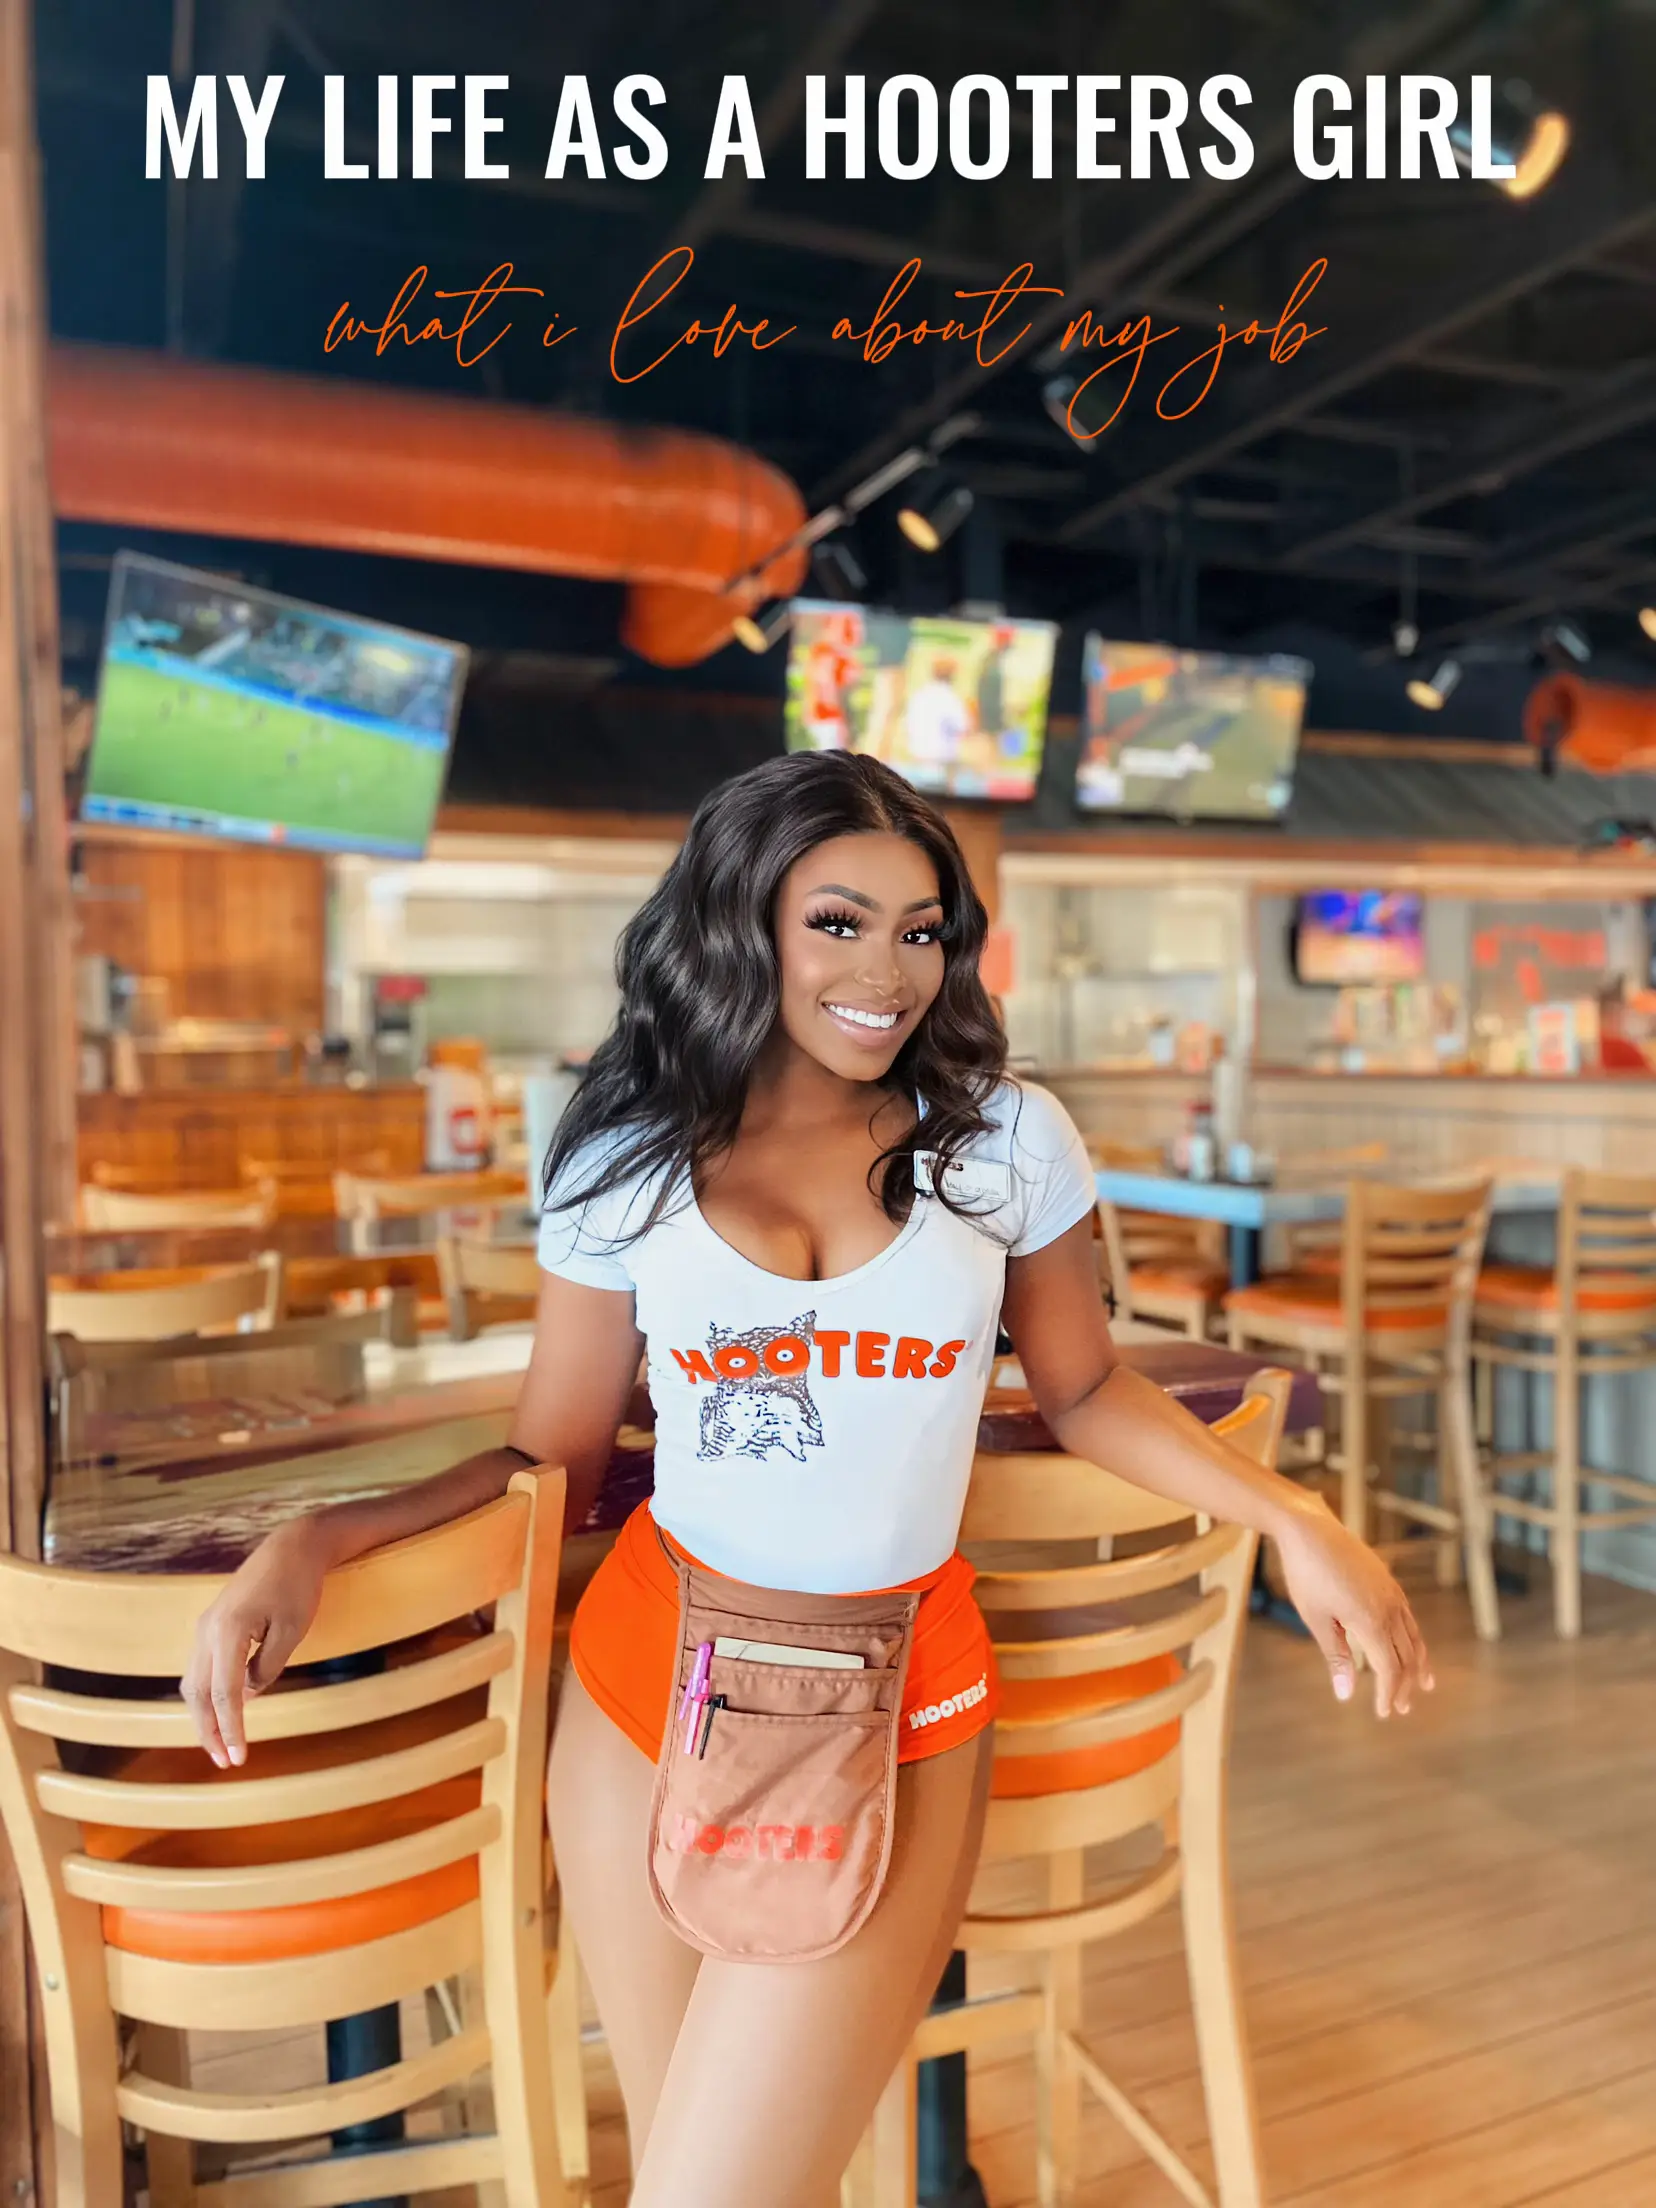 Who love a white woman with blonde hair and double d cup titties at  hooters? : r/hooters